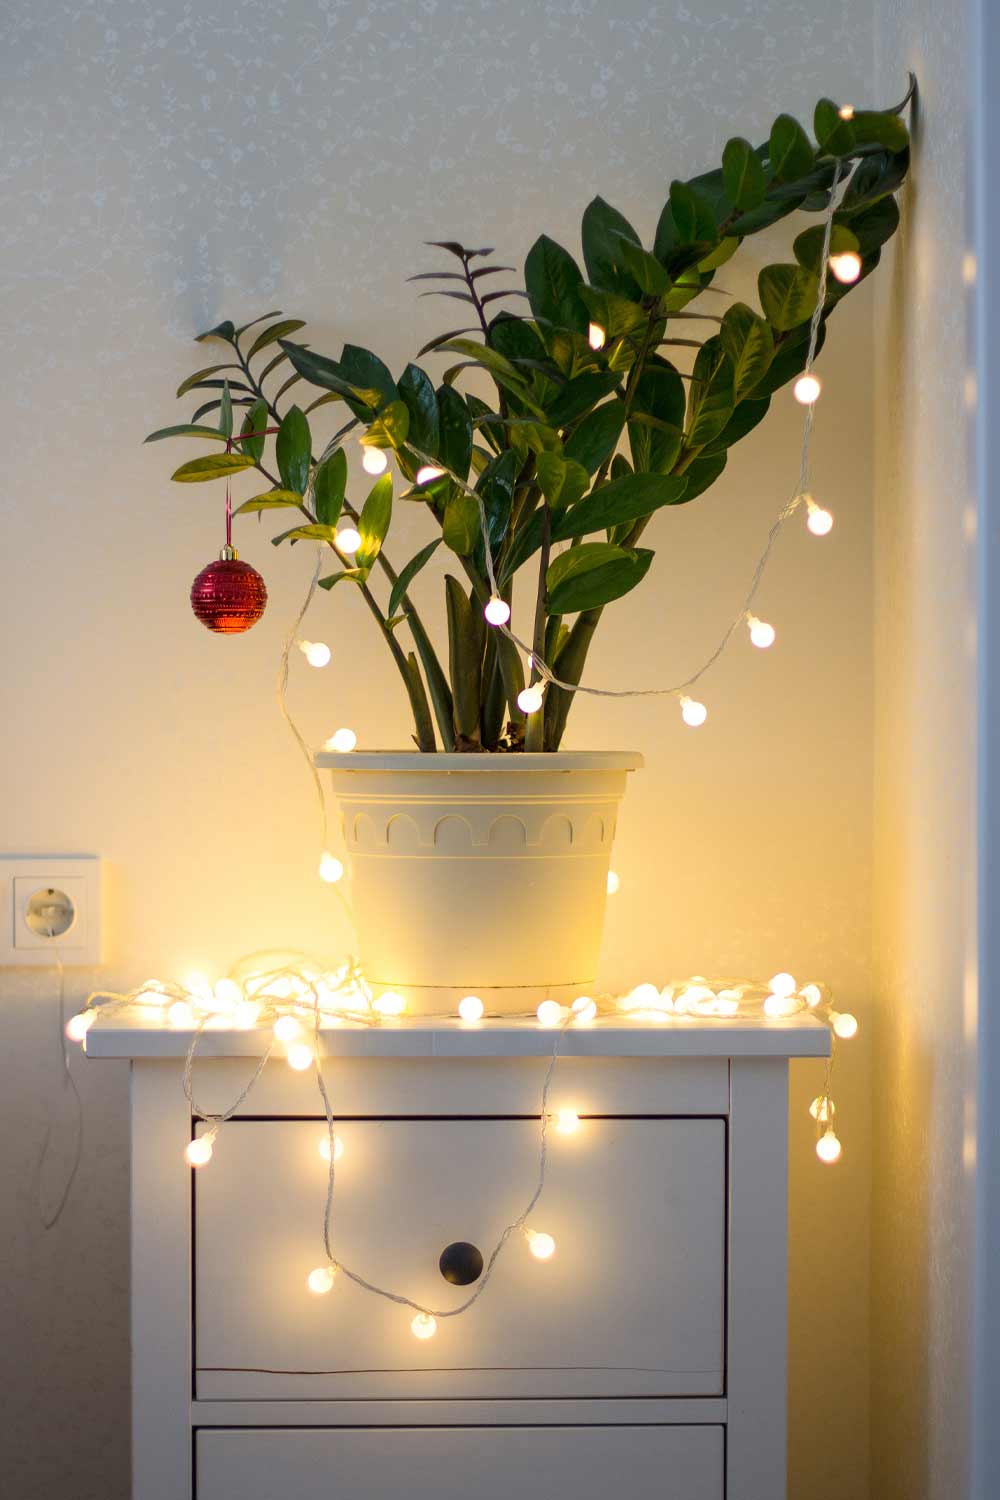 Home Plant Decoration with Christmas Lights